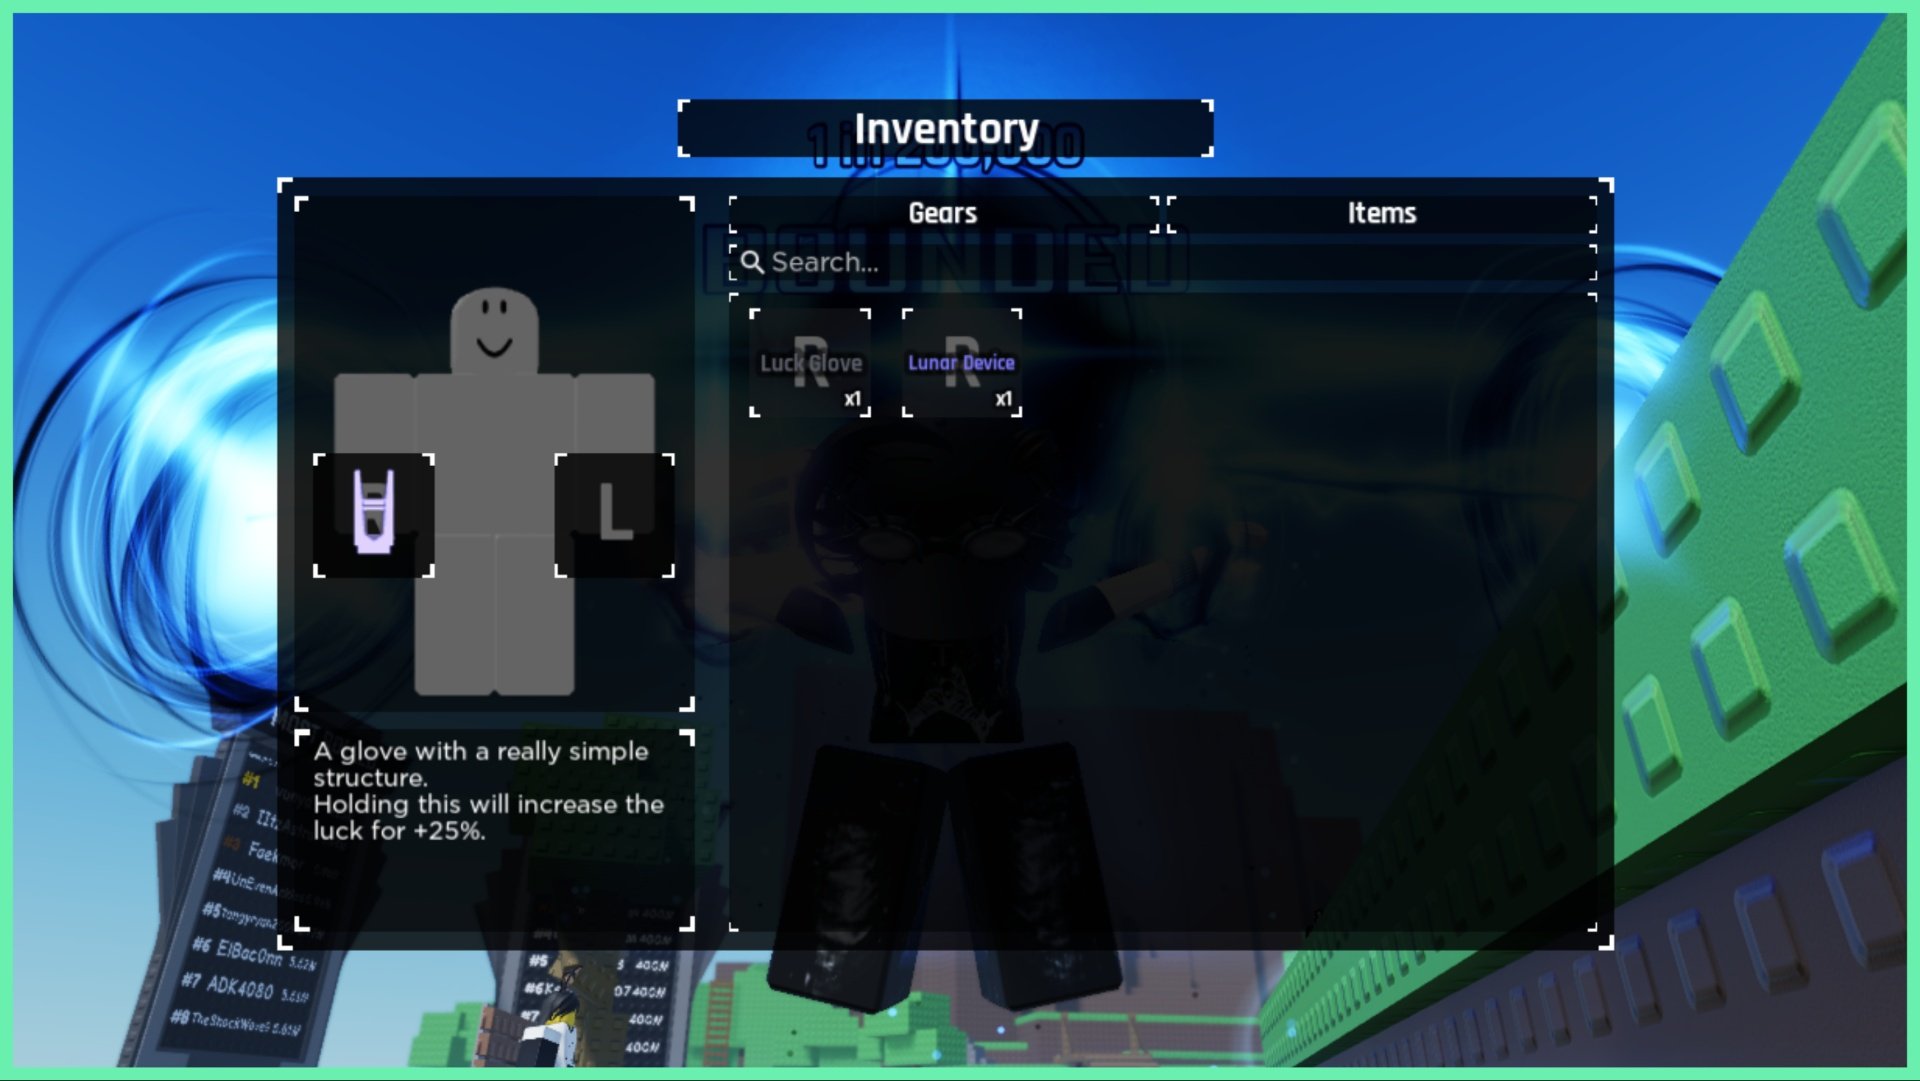 Feature image for our Sols RNG Left Hand Guide which shows the new inventory interface with a greyed out noob avatar on the left with two open slots for where a gauntlet may be equipped. On the right of the silhouette is two gauntlets in the storage of the user